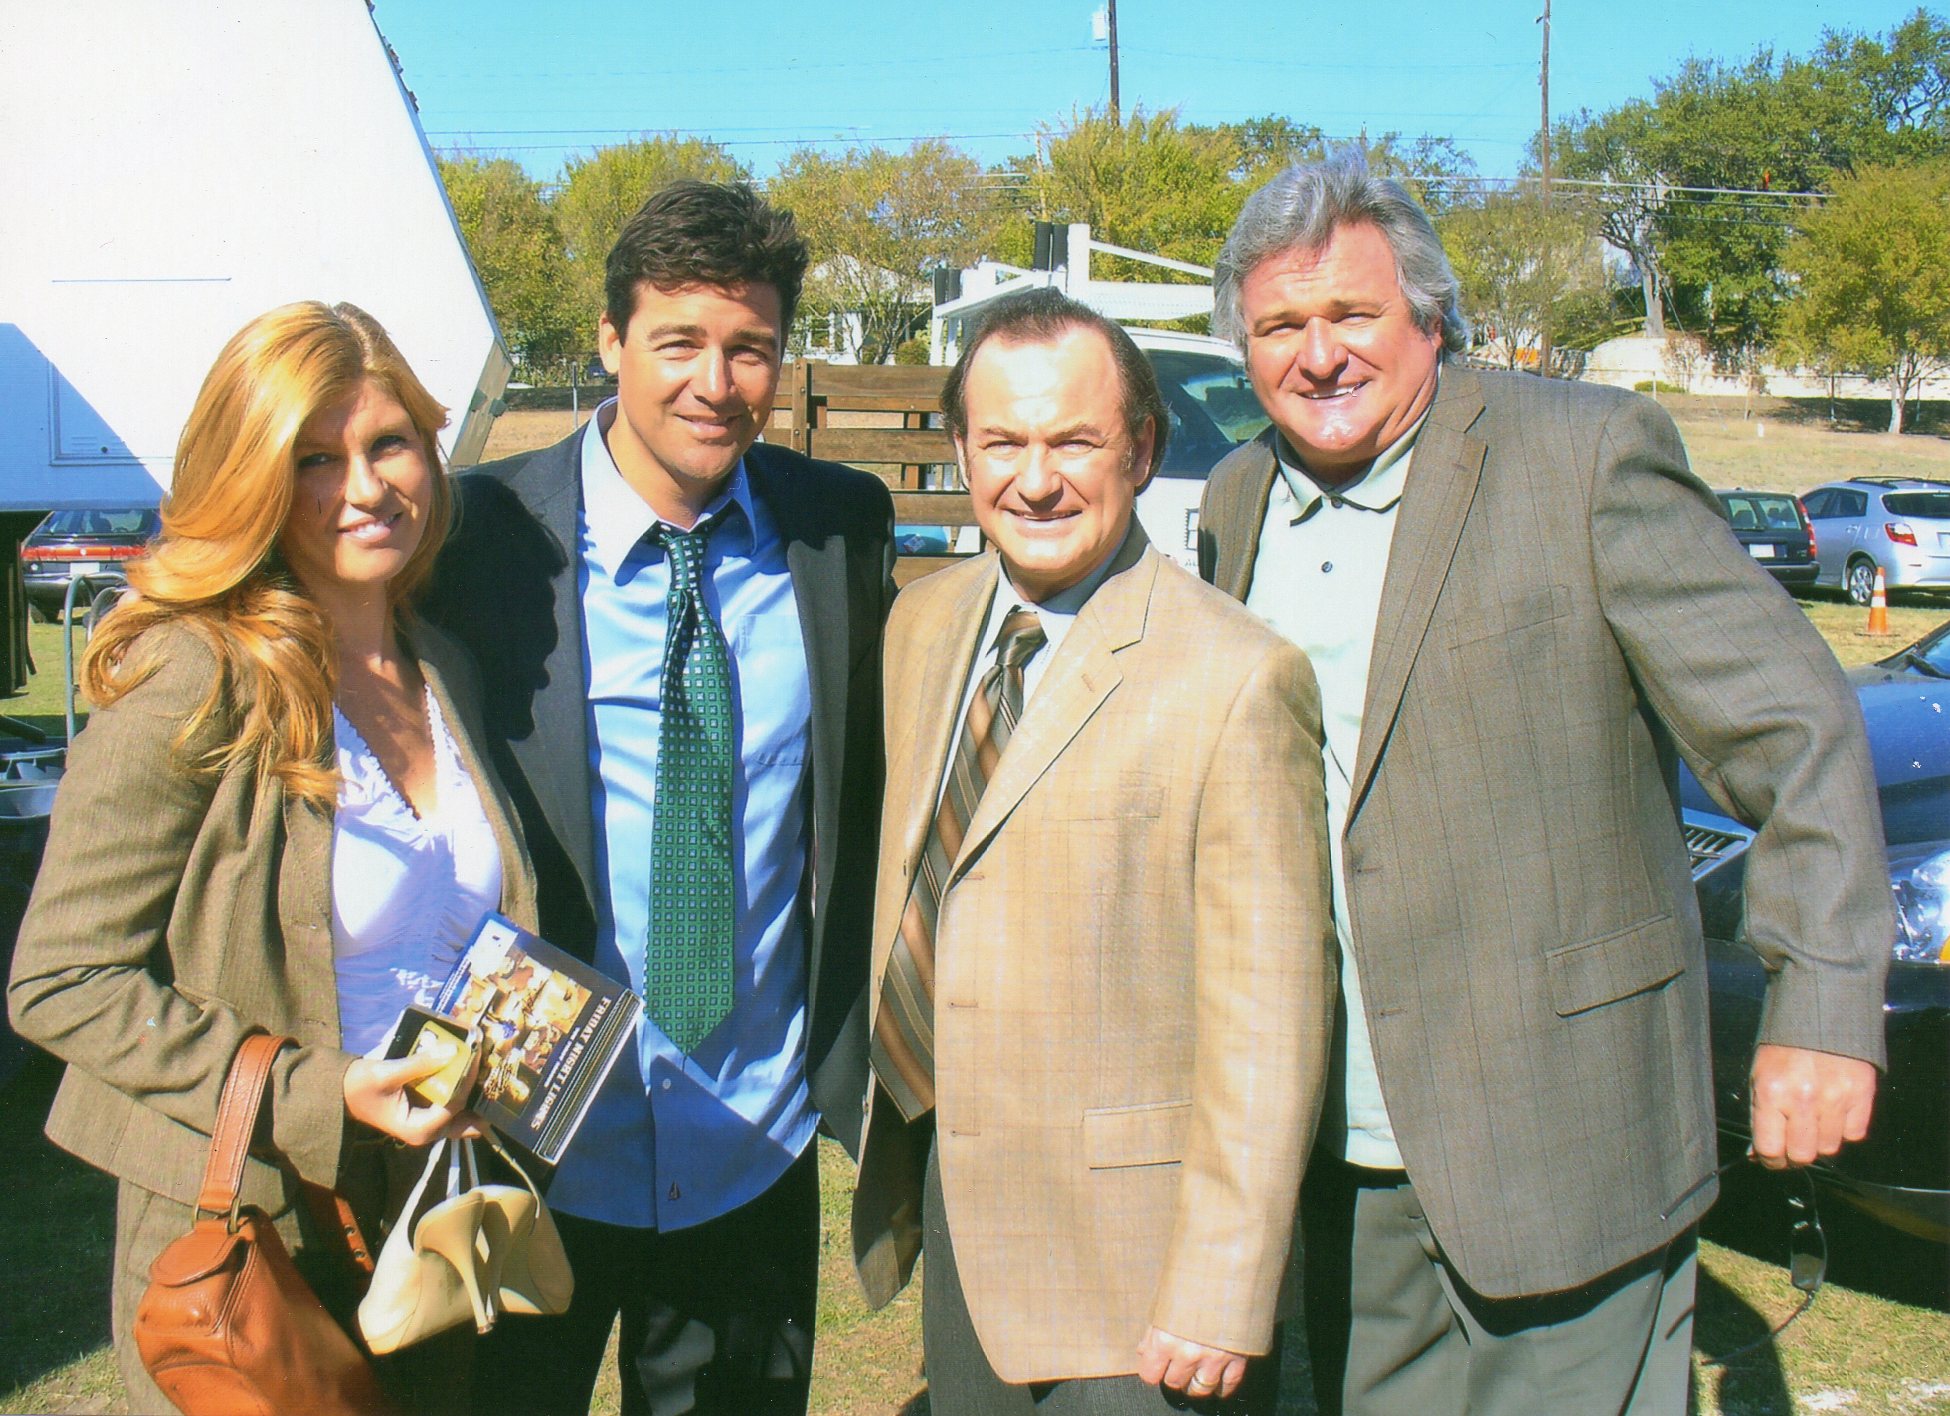 David Born, Connie Britton, Kyle Chandler and Brad Leland on the set of Friday Night Lights.